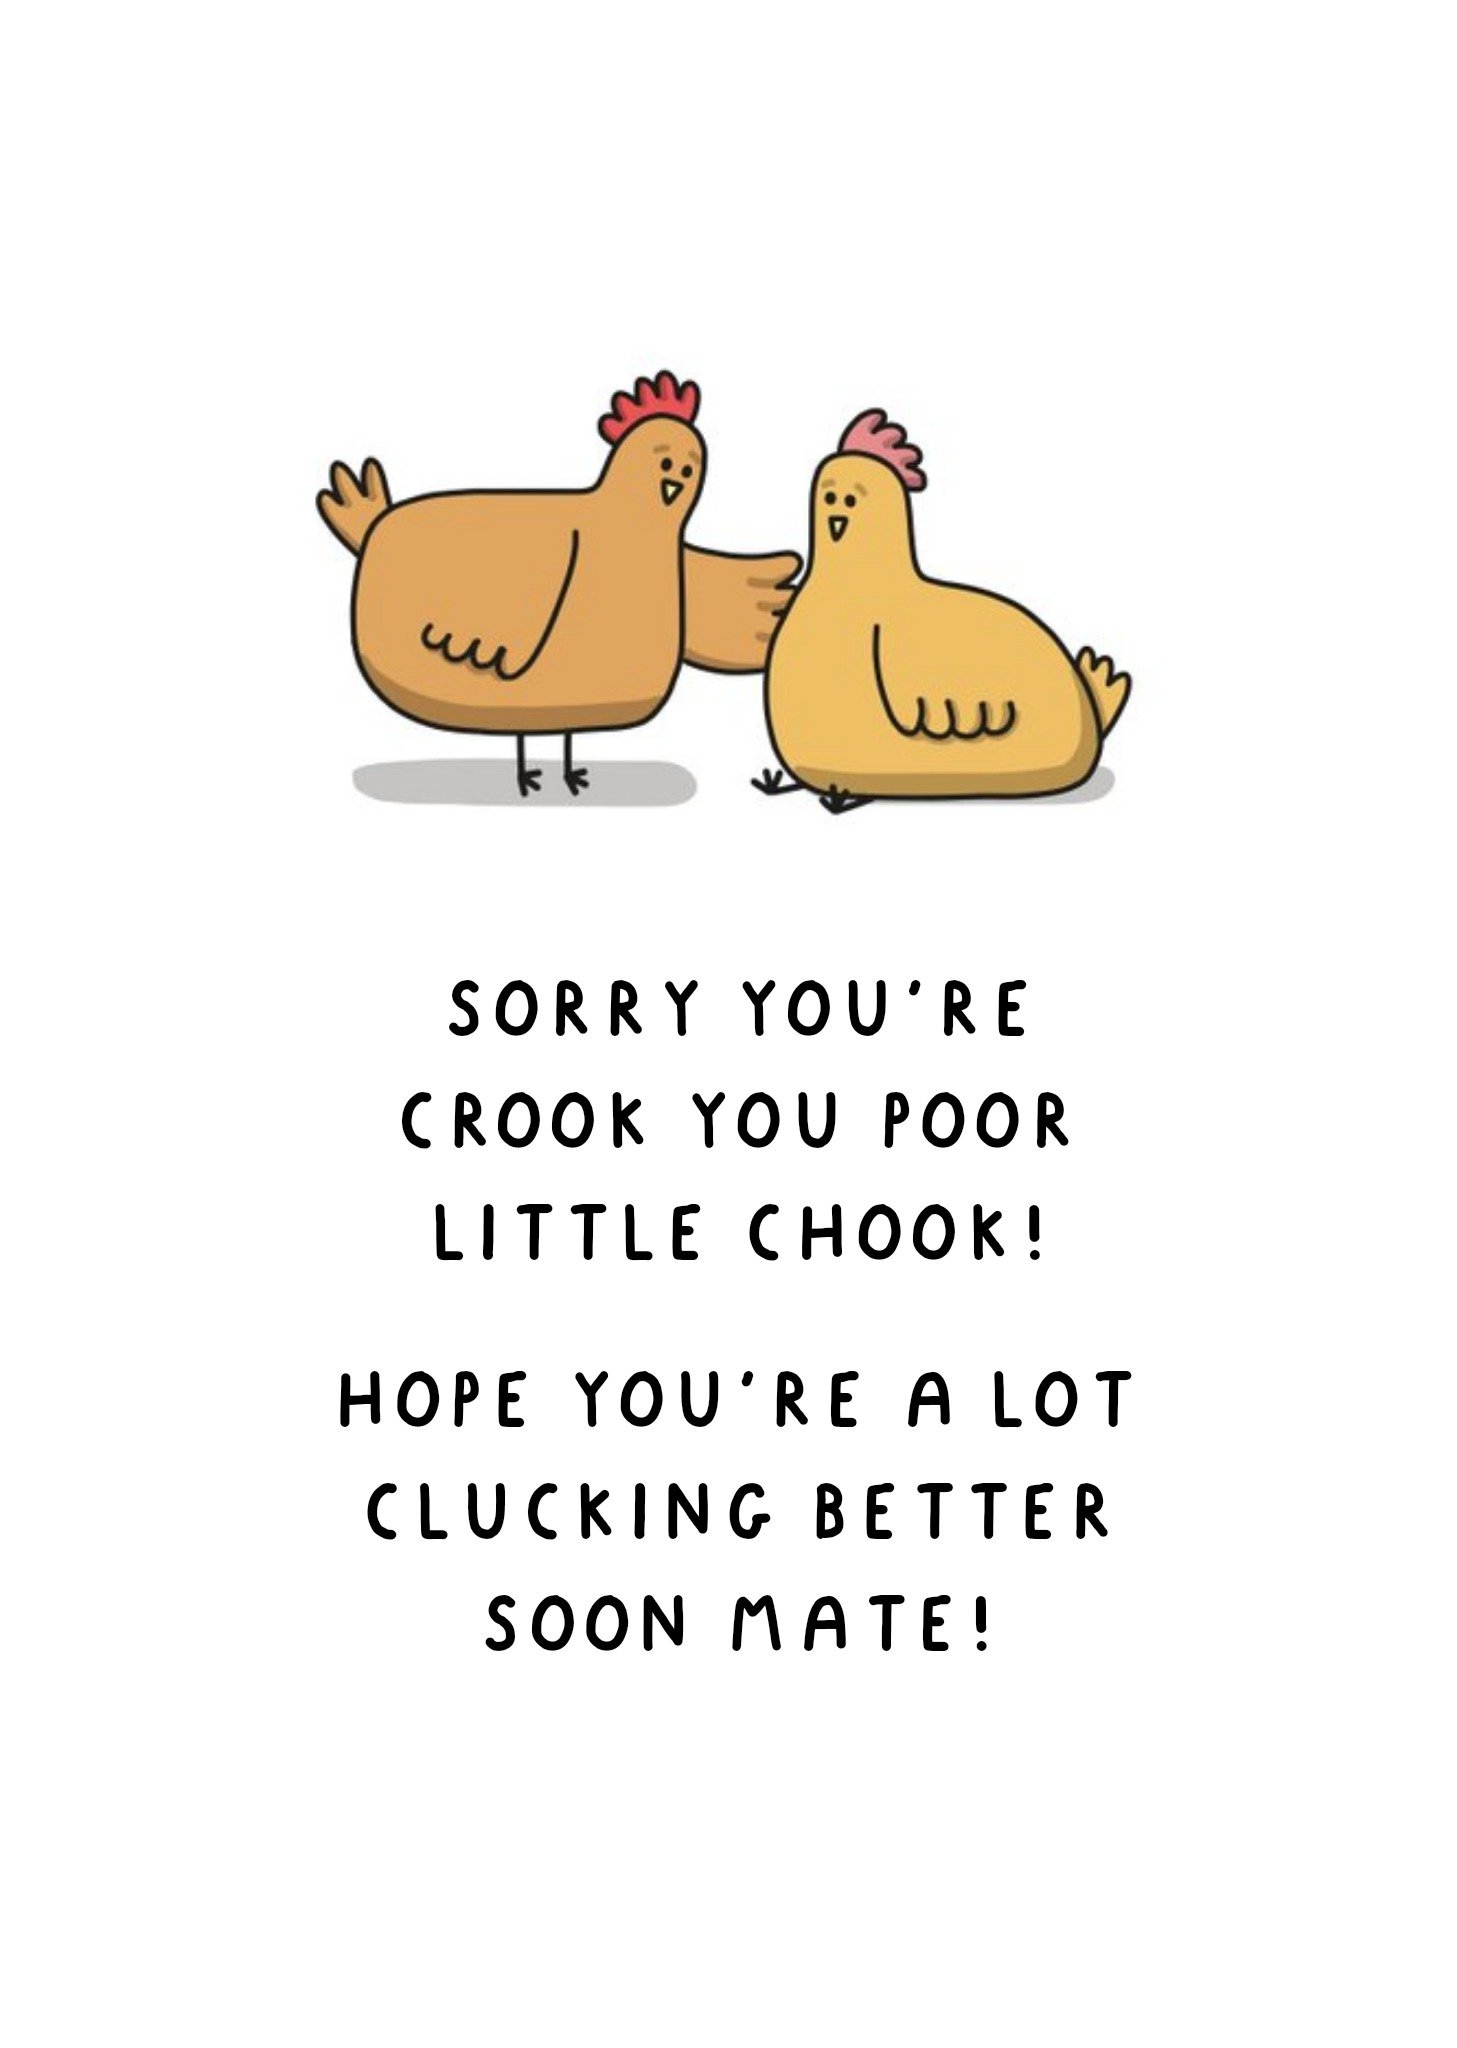 Moonpig Illustration Of Two Chickens Humorous Get Well Soon Card, Large